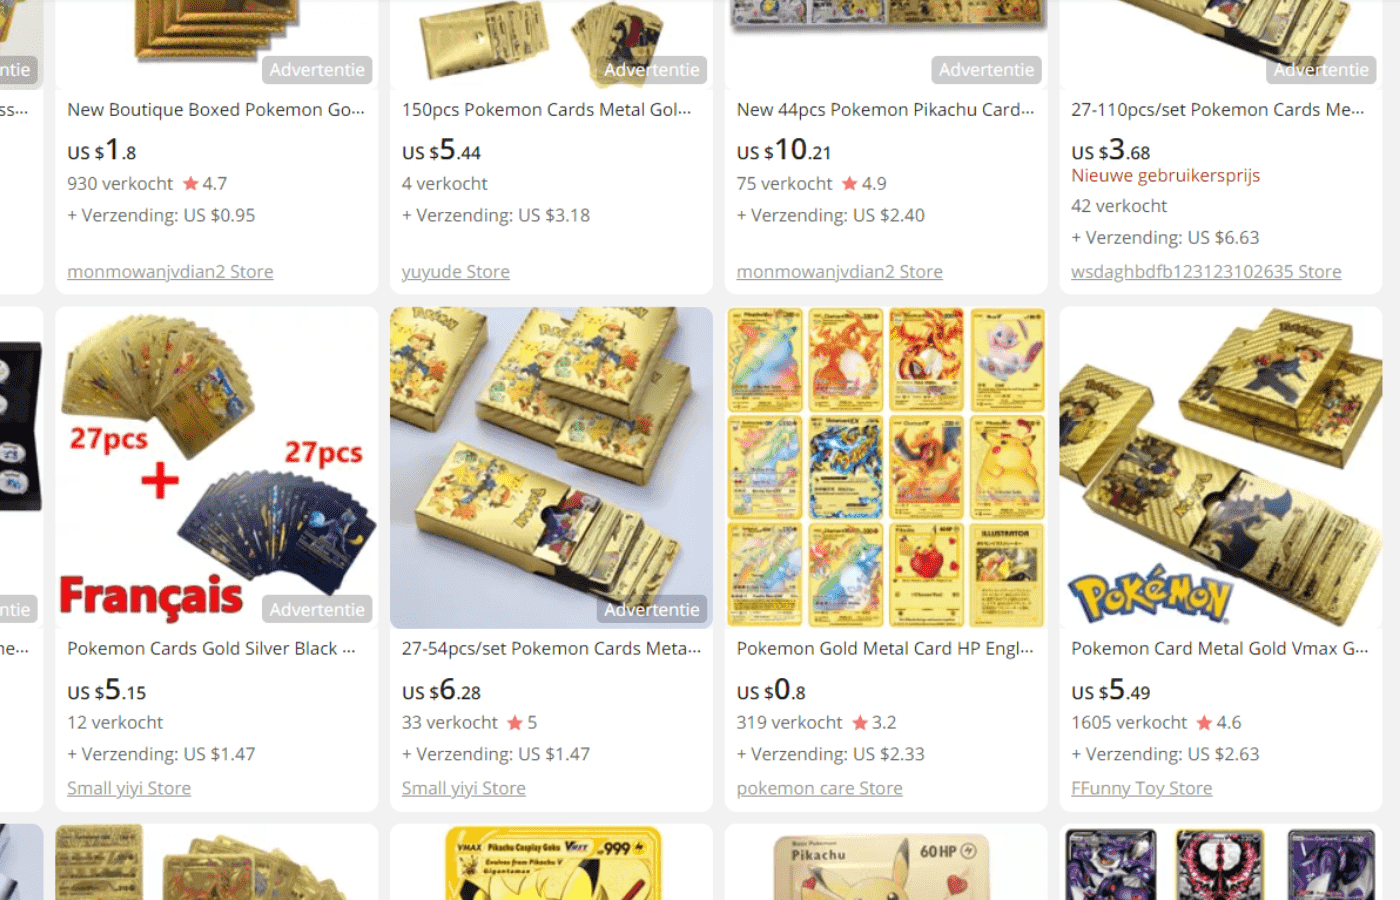 are golden pokemon cards real